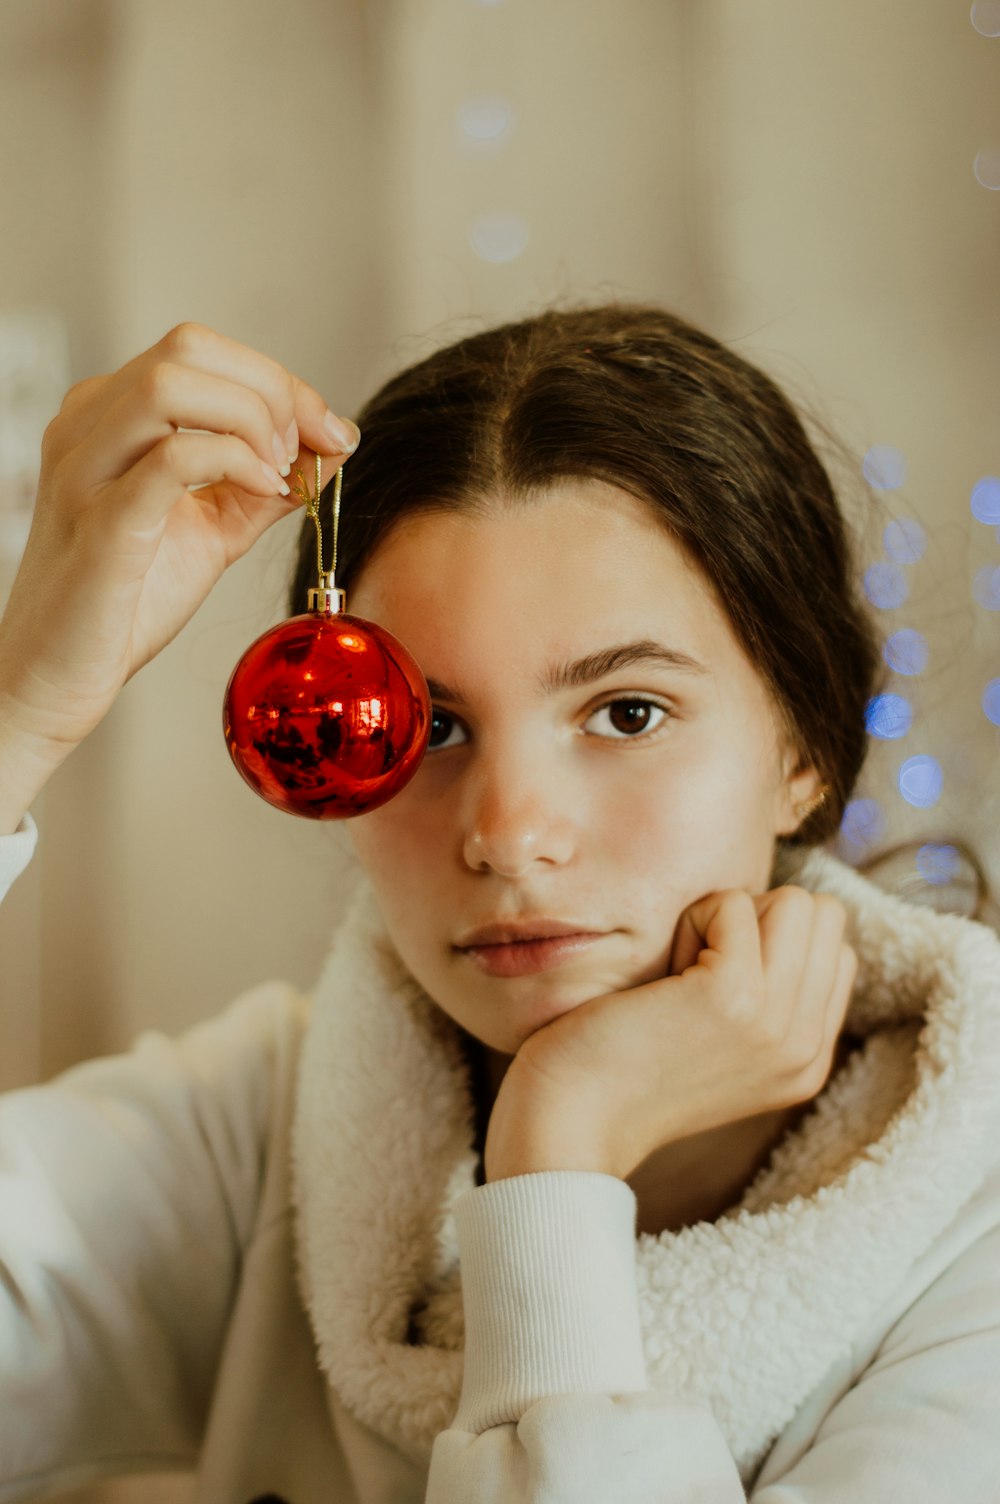 a woman holding a red ornament in front of her face